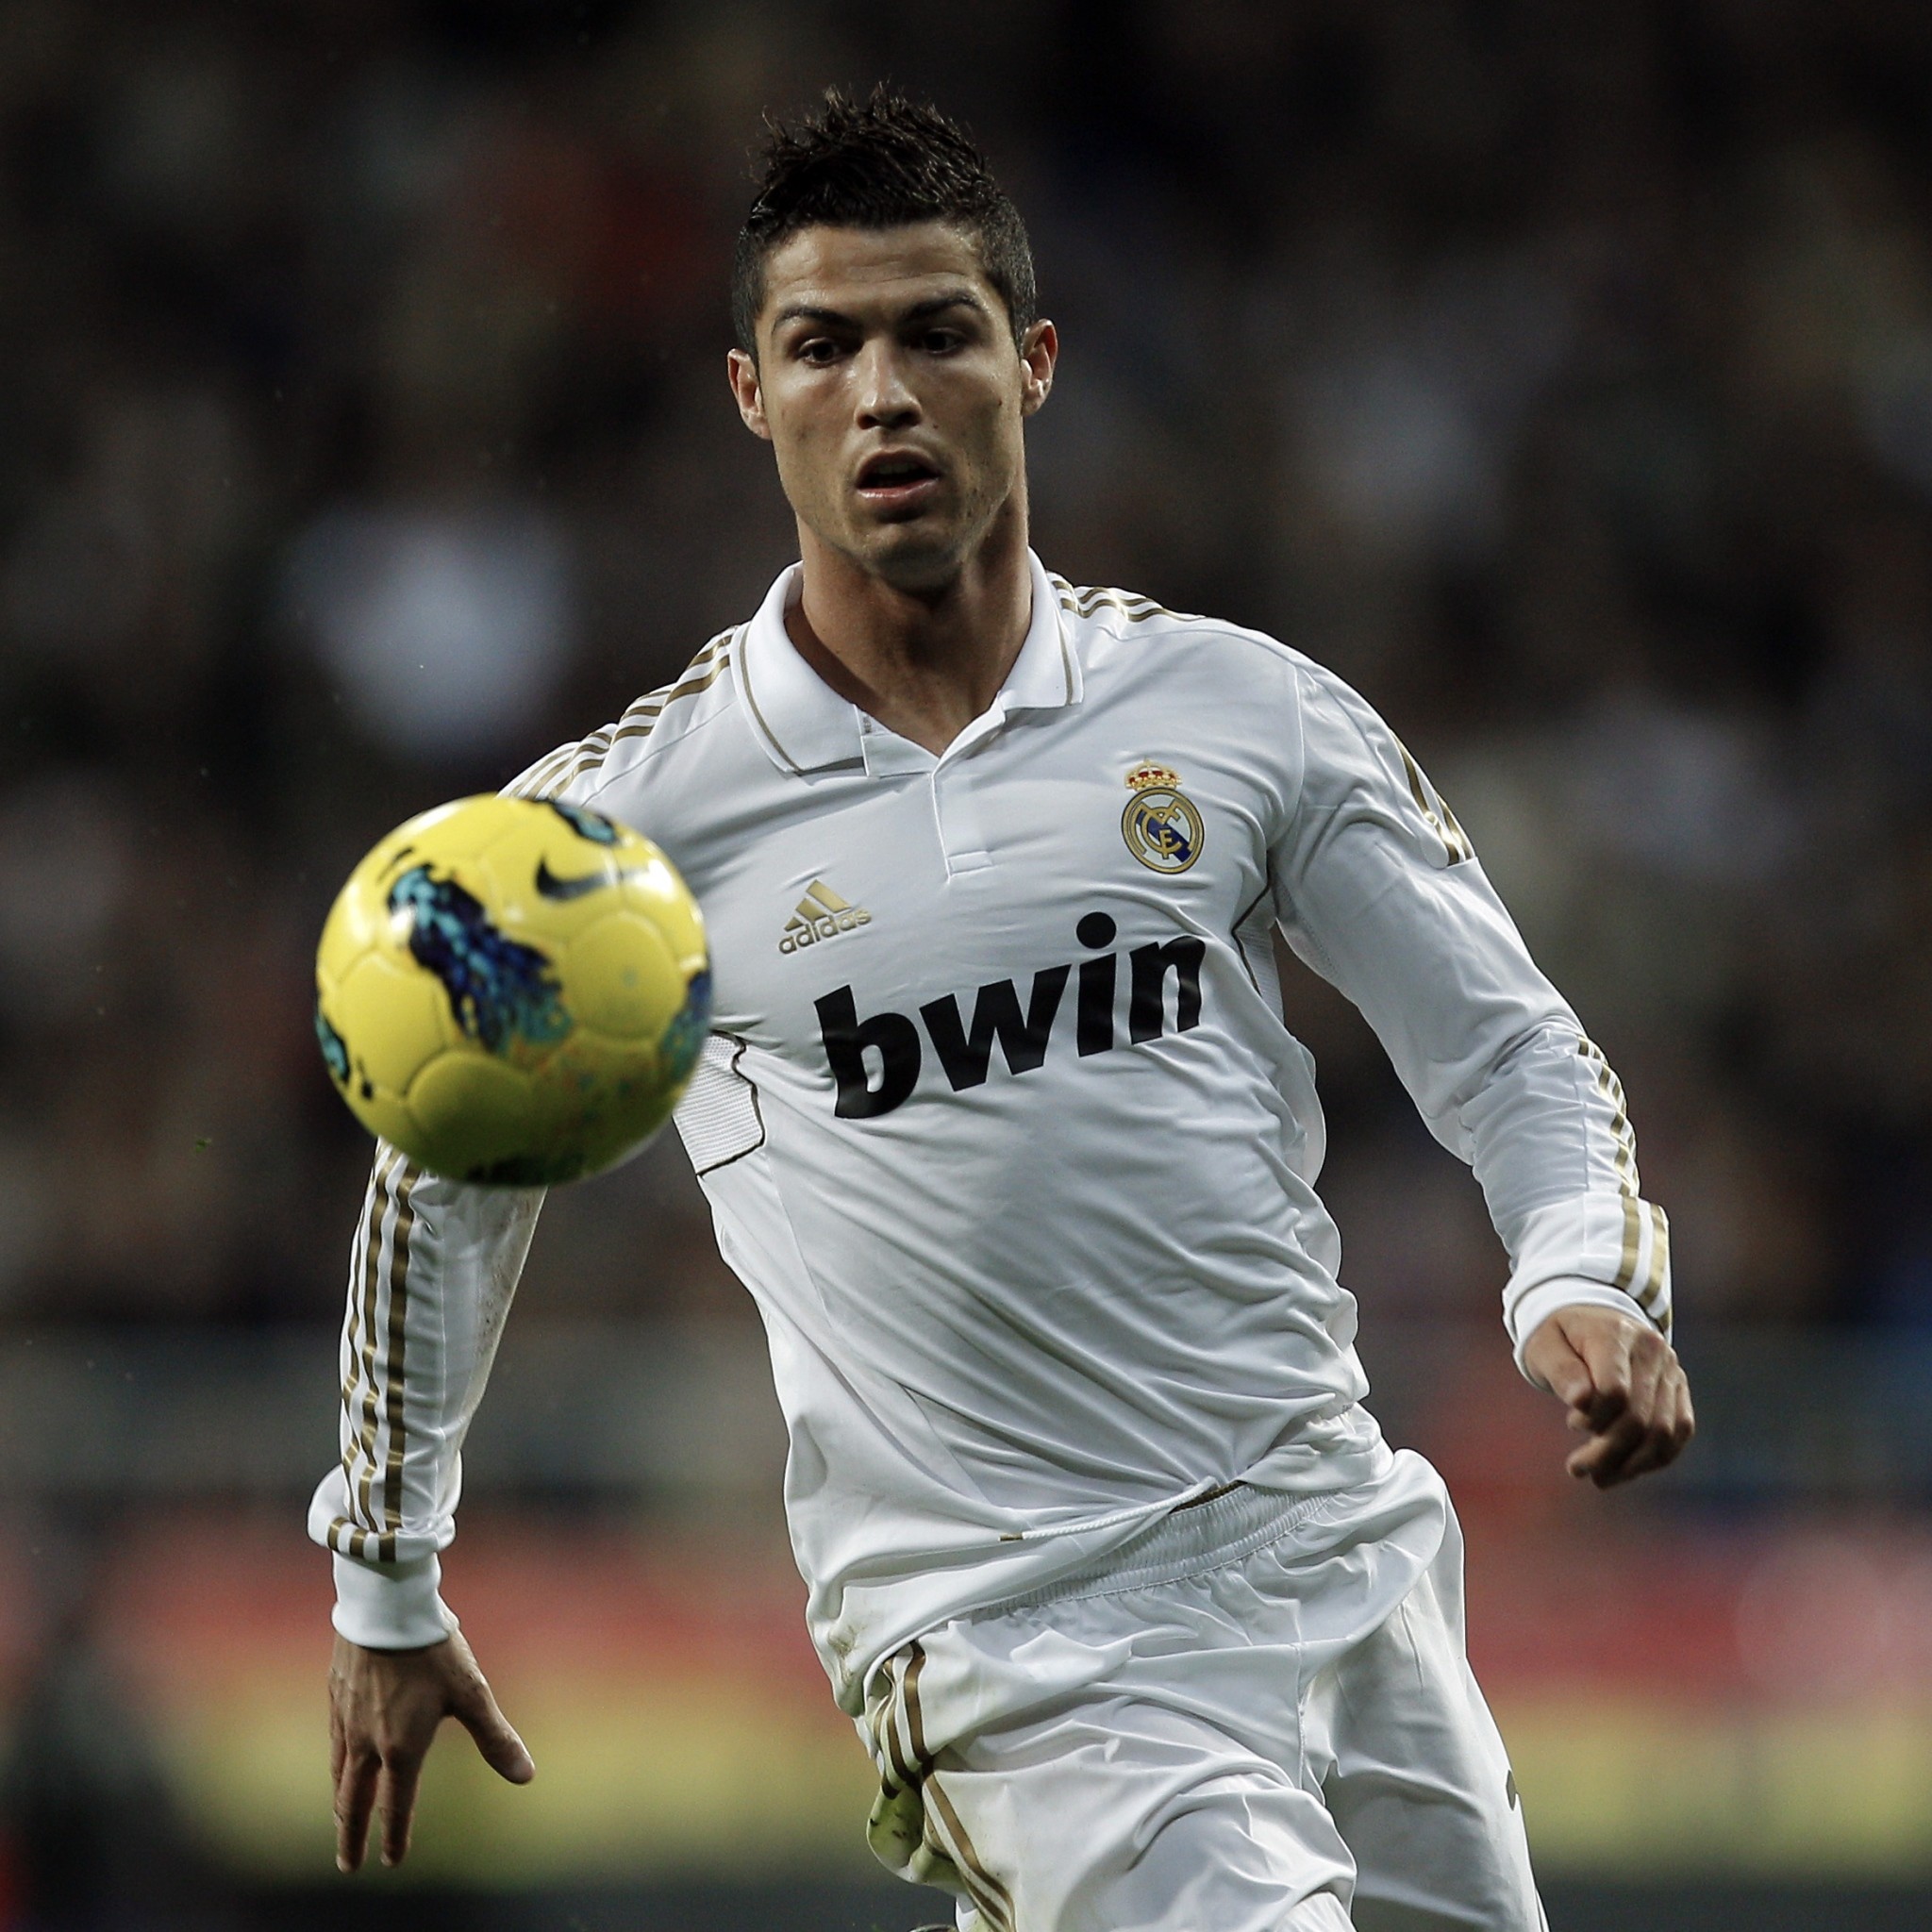 Cristiano Ronaldo Dark Wallpapers - Soccer Wallpapers for iPhone